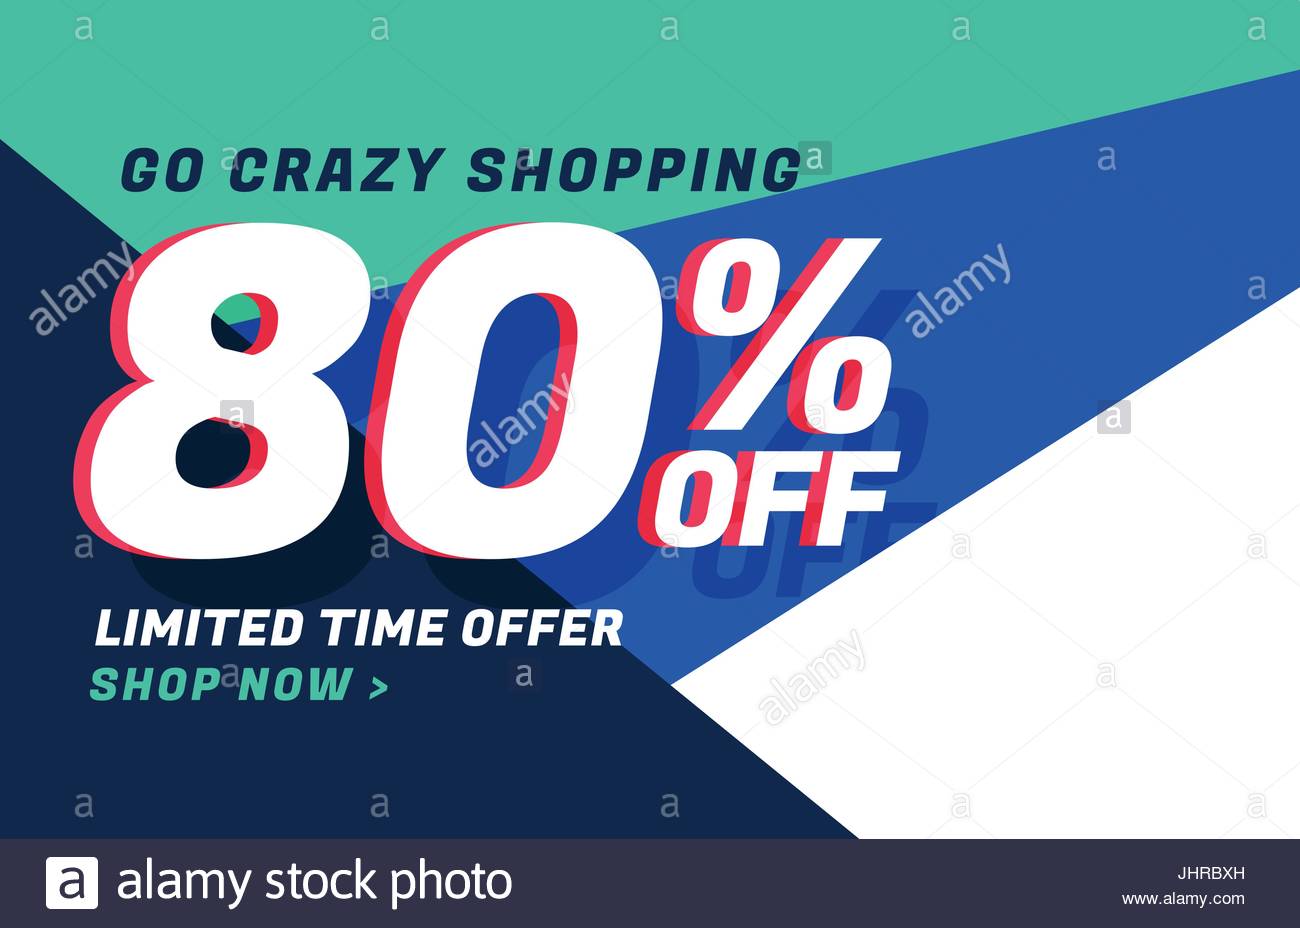 Crazy Shopping Sale Banner Design With Offer Details Stock Vector